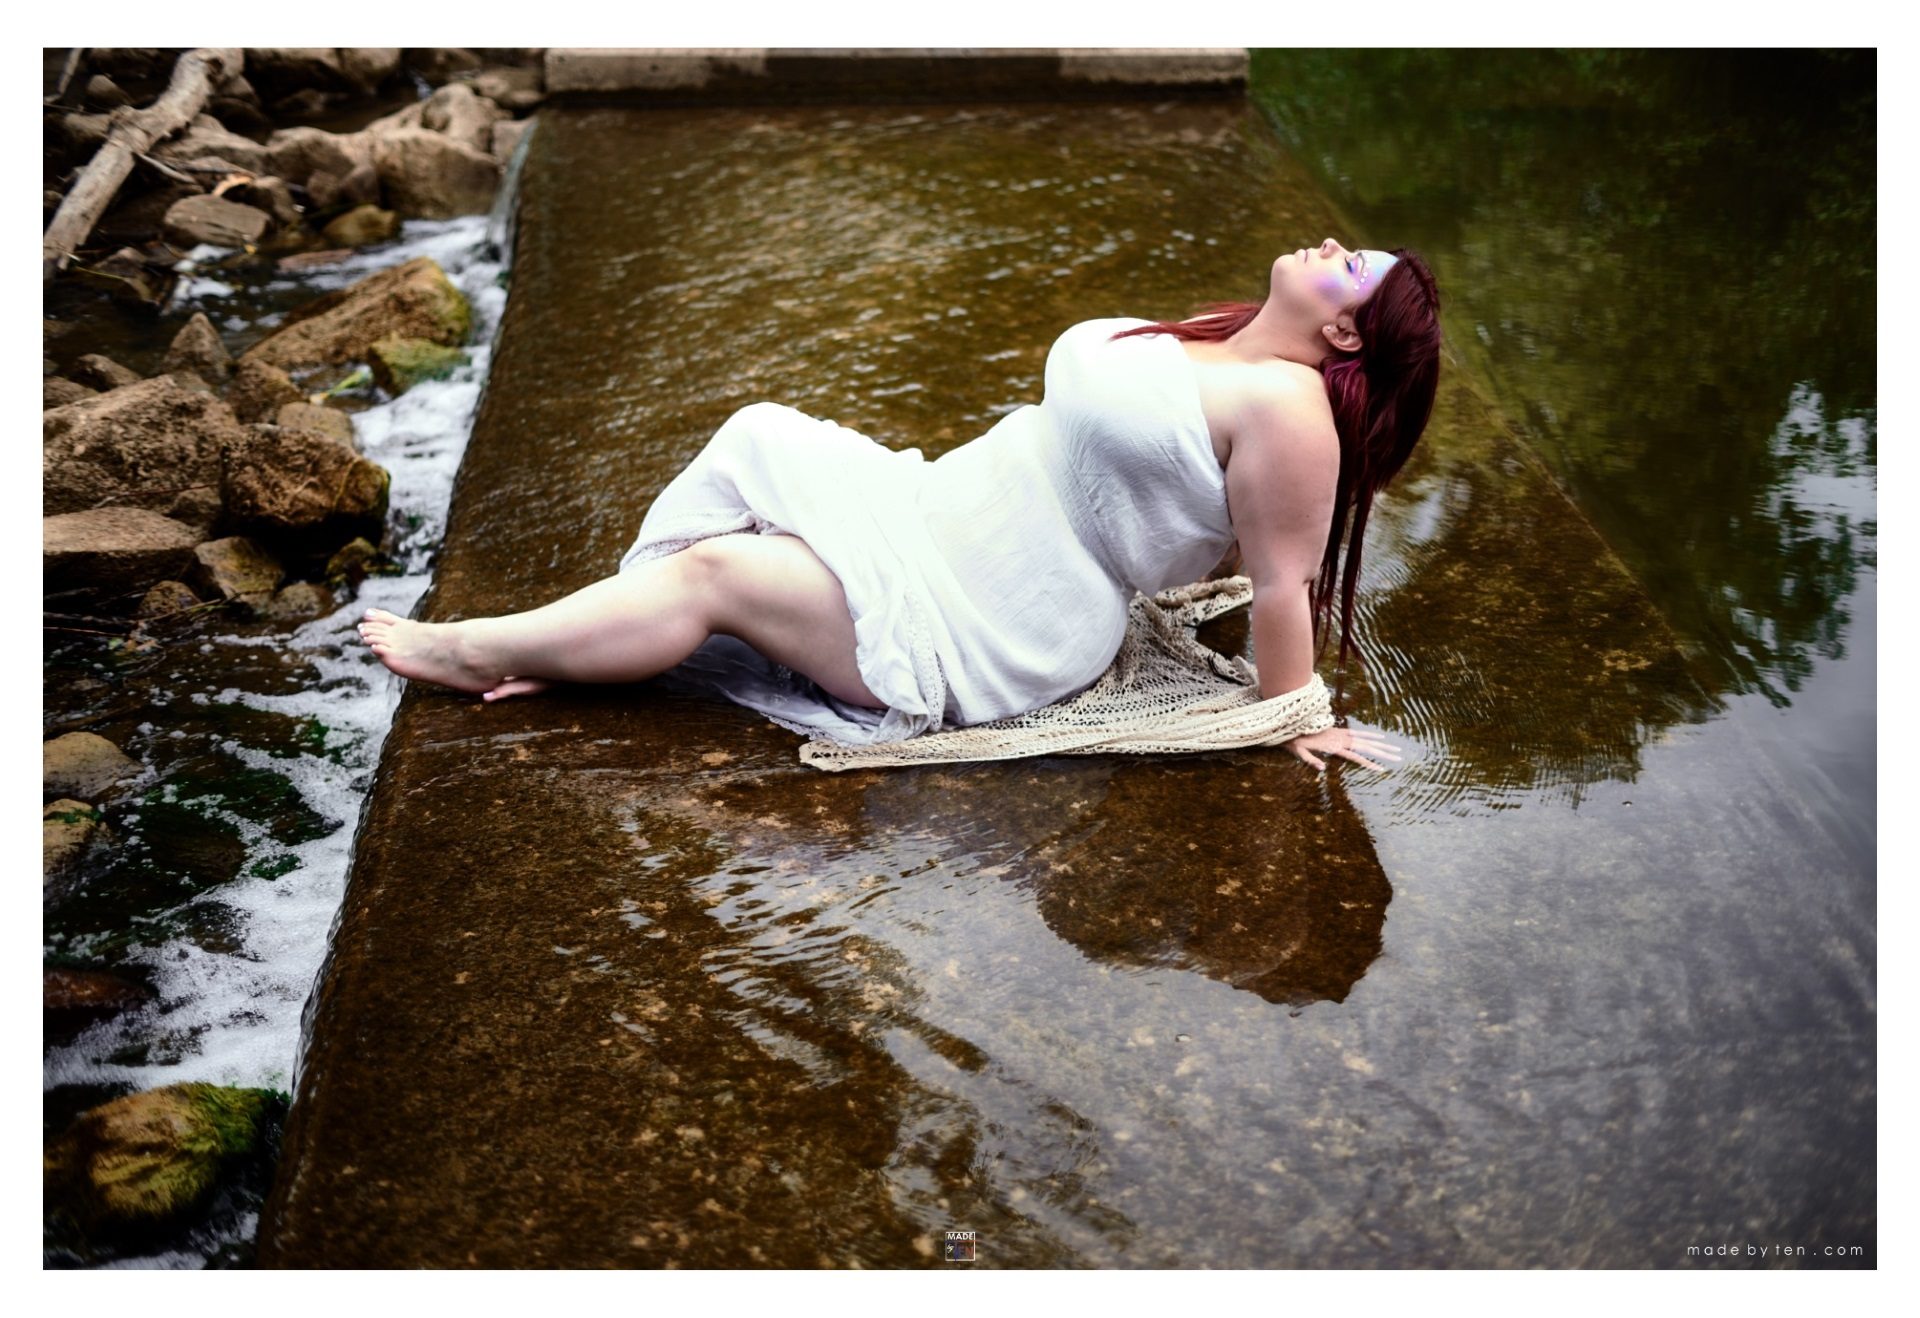 Woman Sitting in Pond Water - GTA Women Fantasy Photography